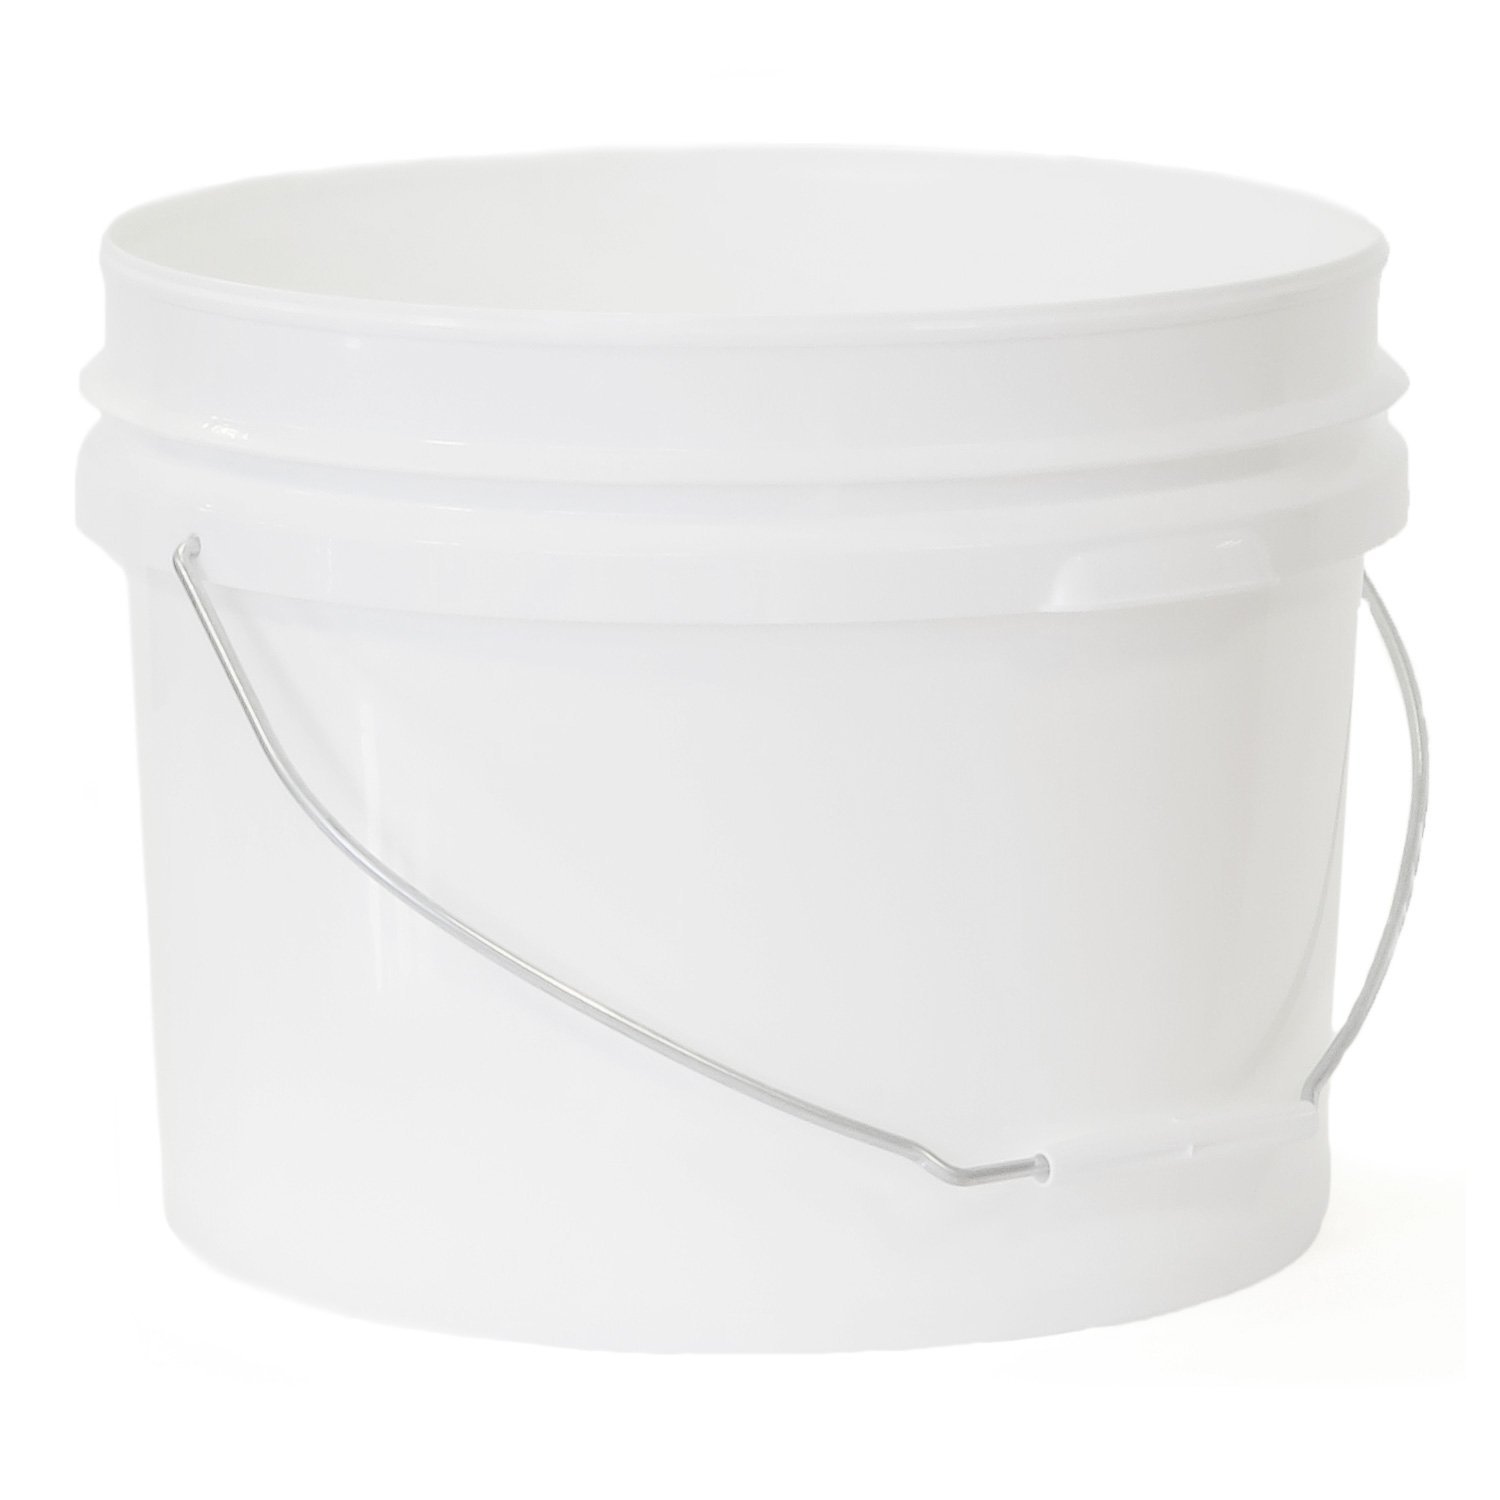 10L White PP Elite Pail With TE Push On Neck Wire Handle